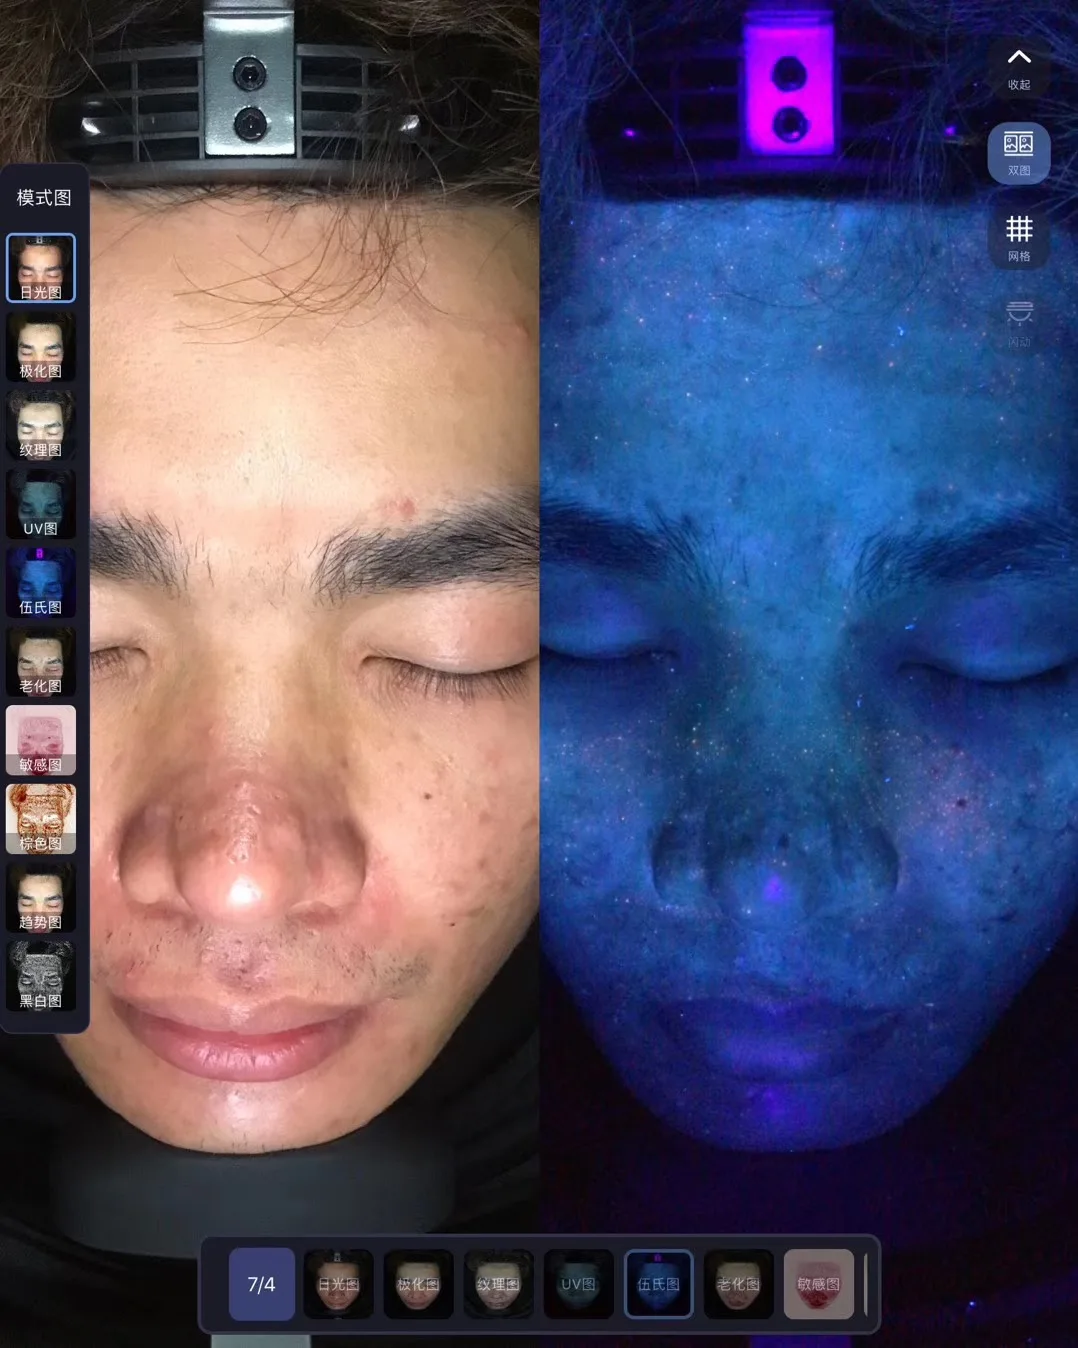 DJM Moreme Facial Skin Analysis Machine Instrument Good Comparison Before And After Treatment In Spa & Clinic